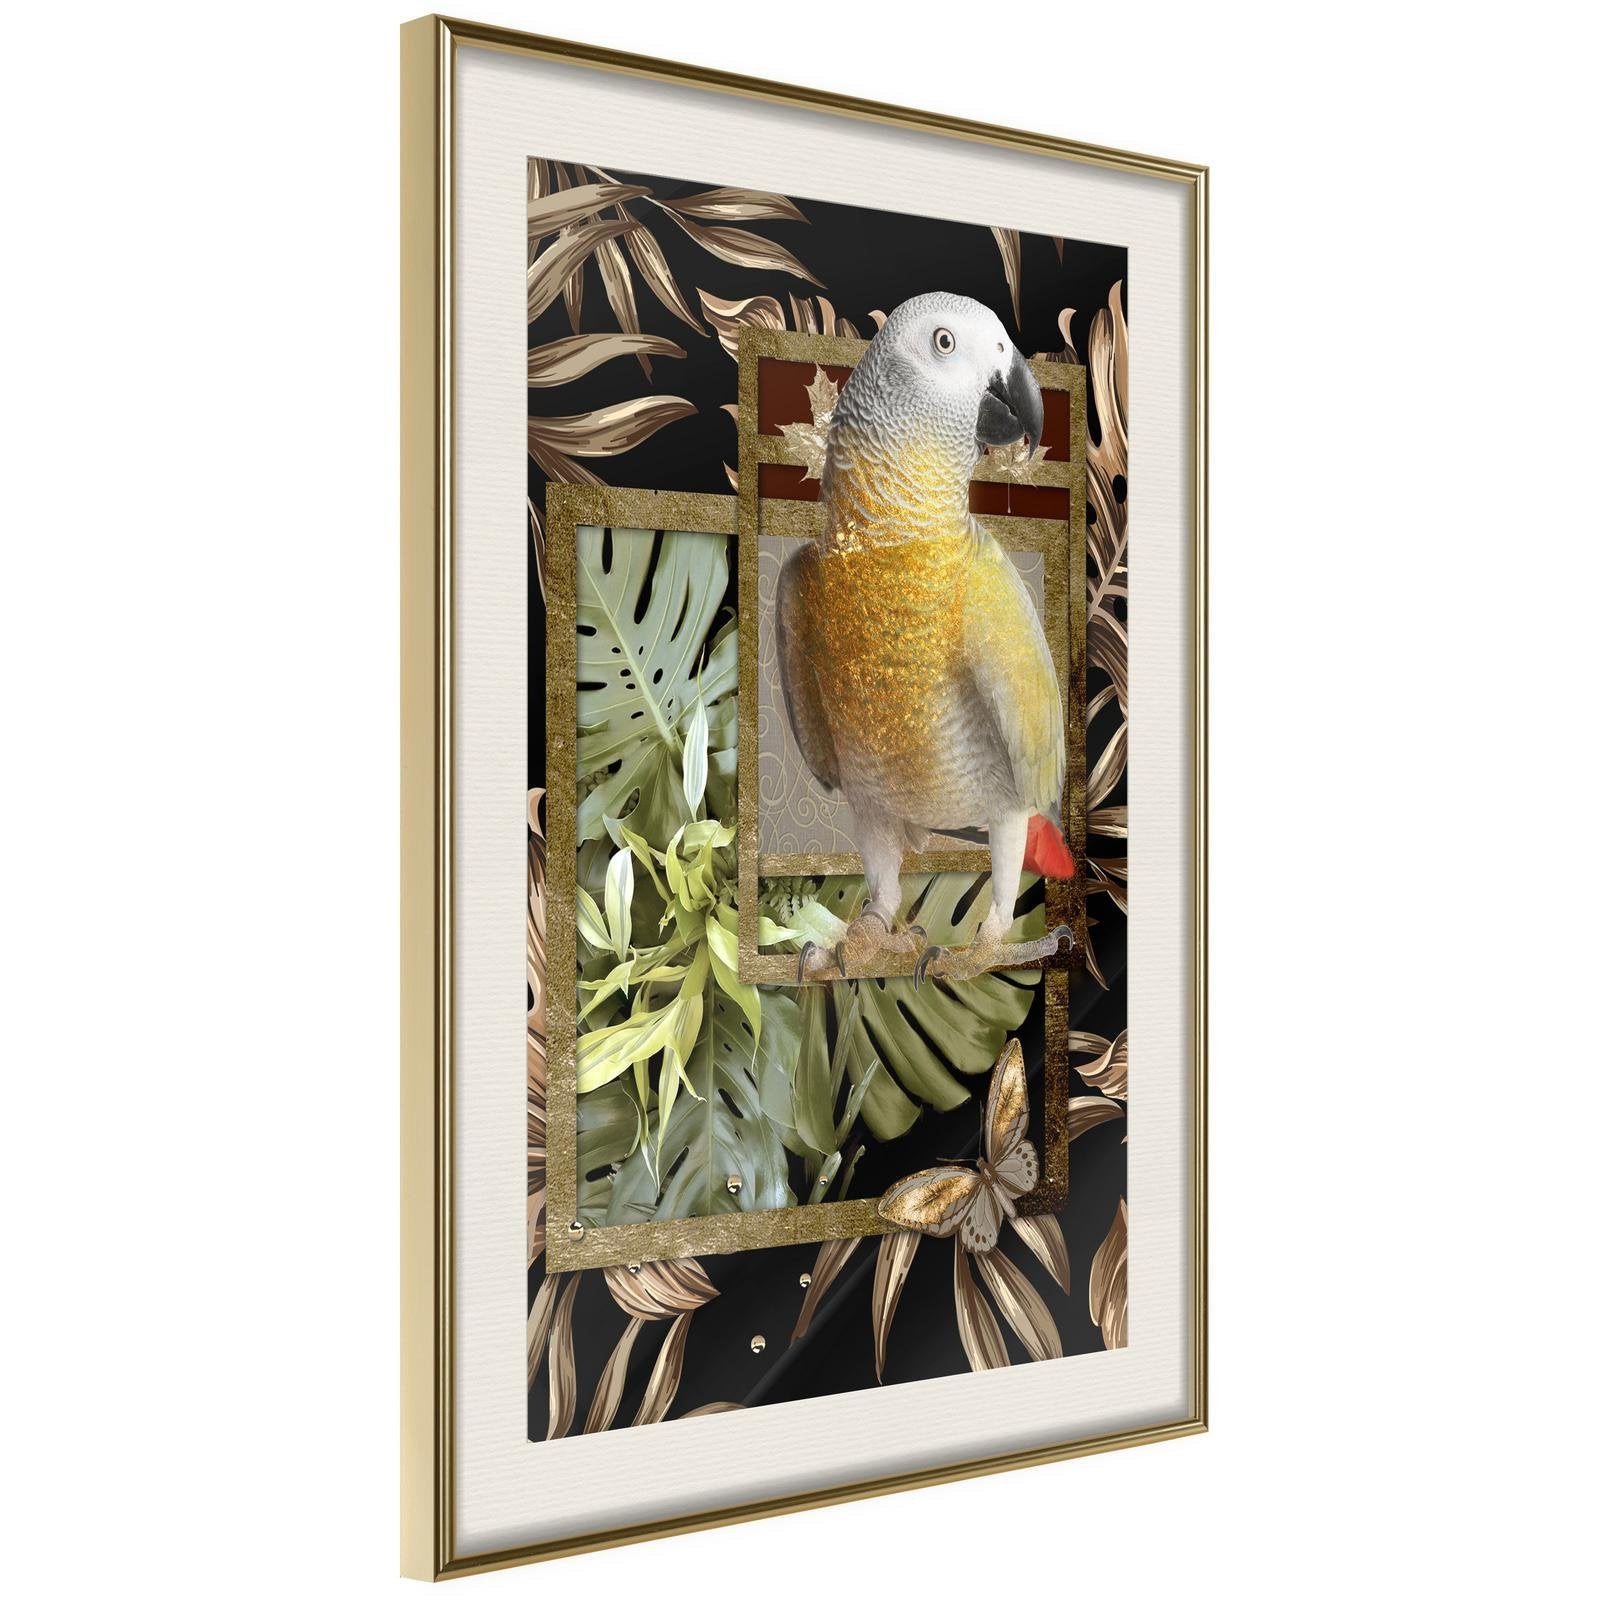 Inramad Poster / Tavla - Composition with Gold Parrot - 30x45 Guldram med passepartout